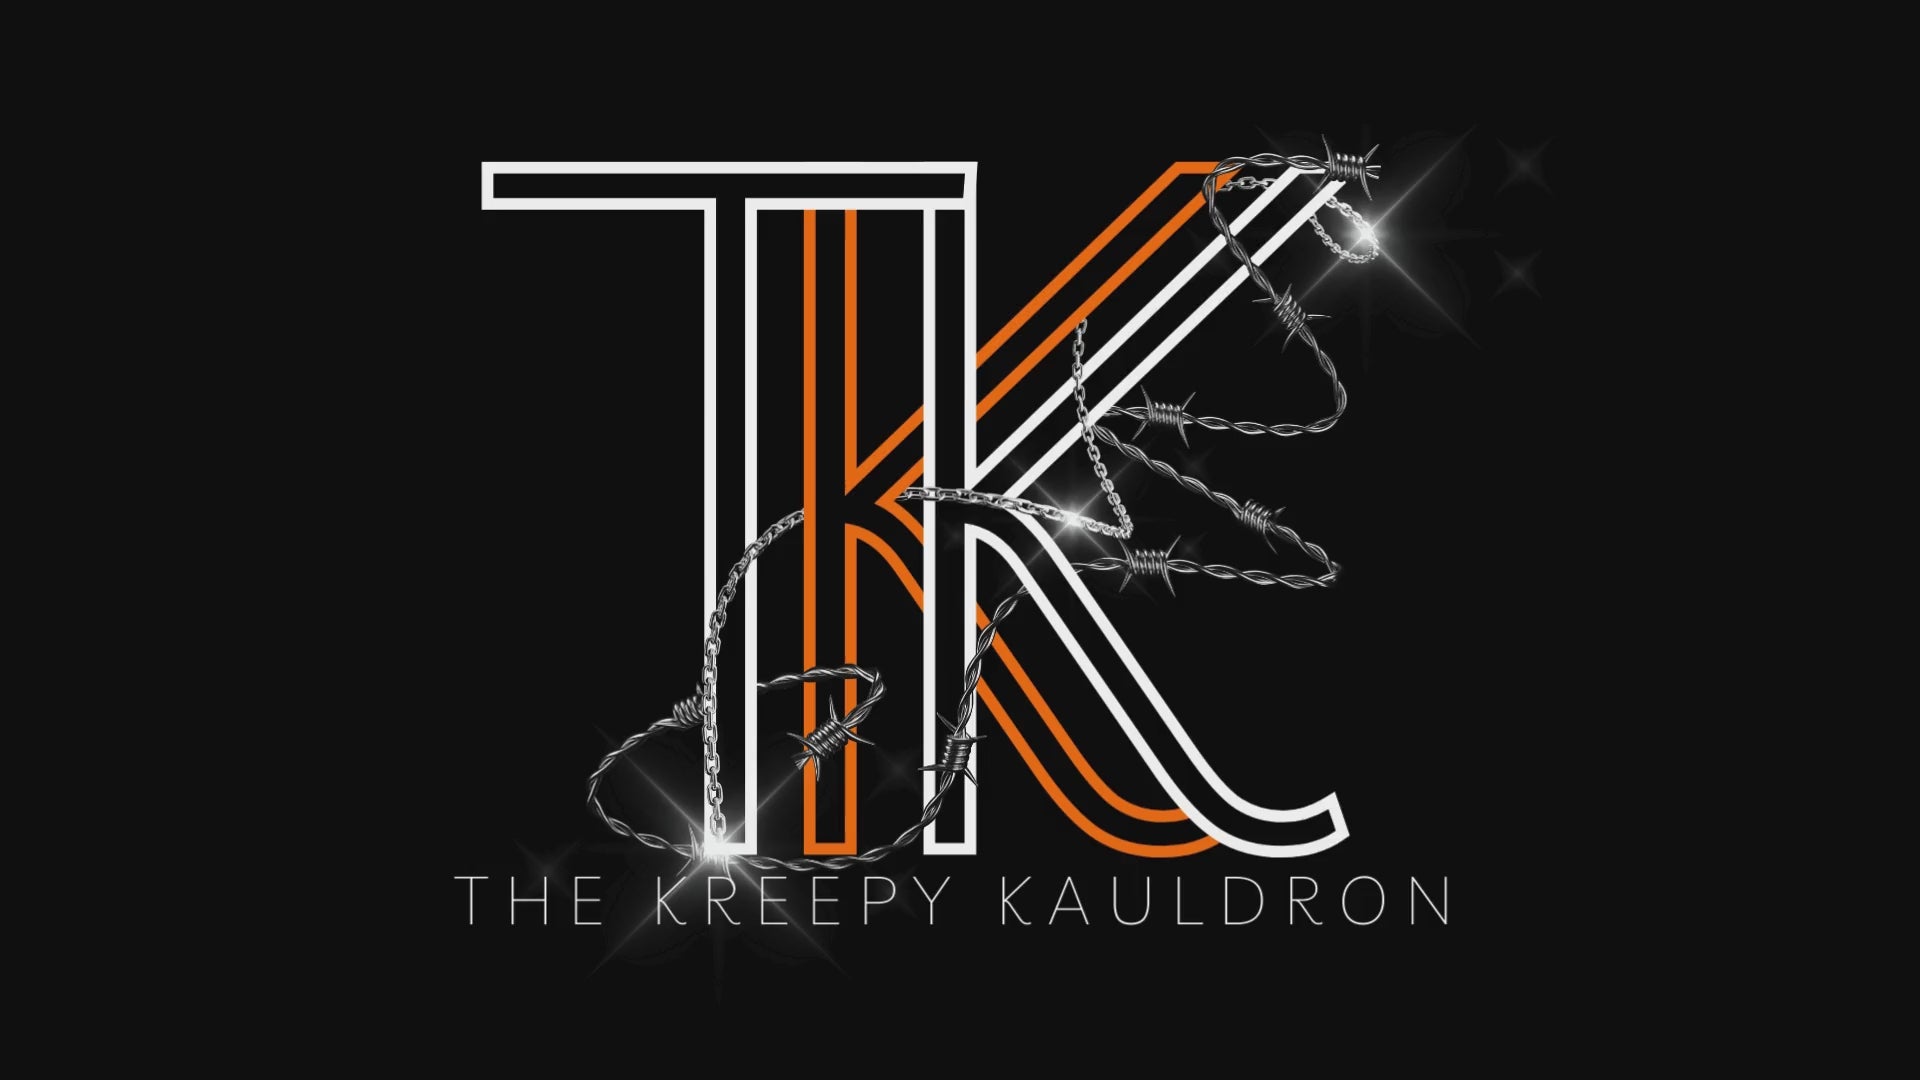 Load video: A video introducing The Kreepy Kauldron and the owner Kreepy Kristy